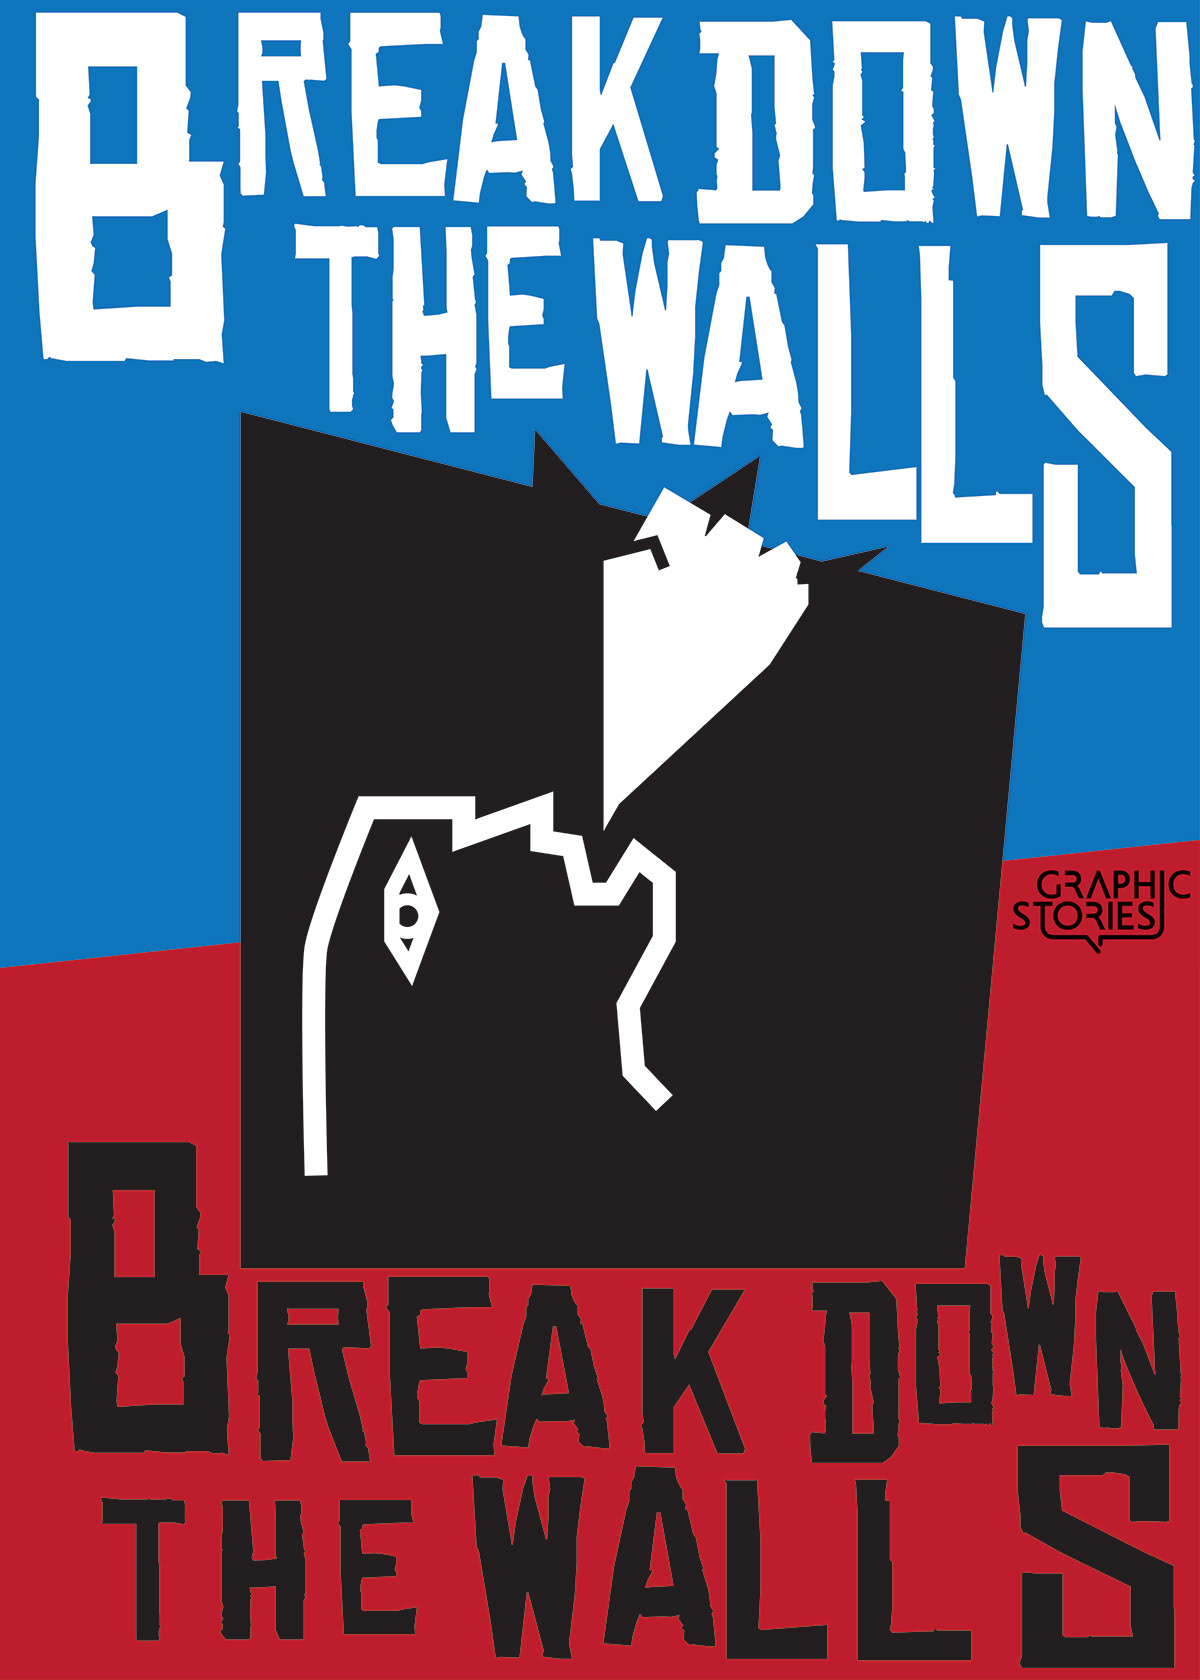 Break Down The Walls Gpahic Stories Cyprus poster contest